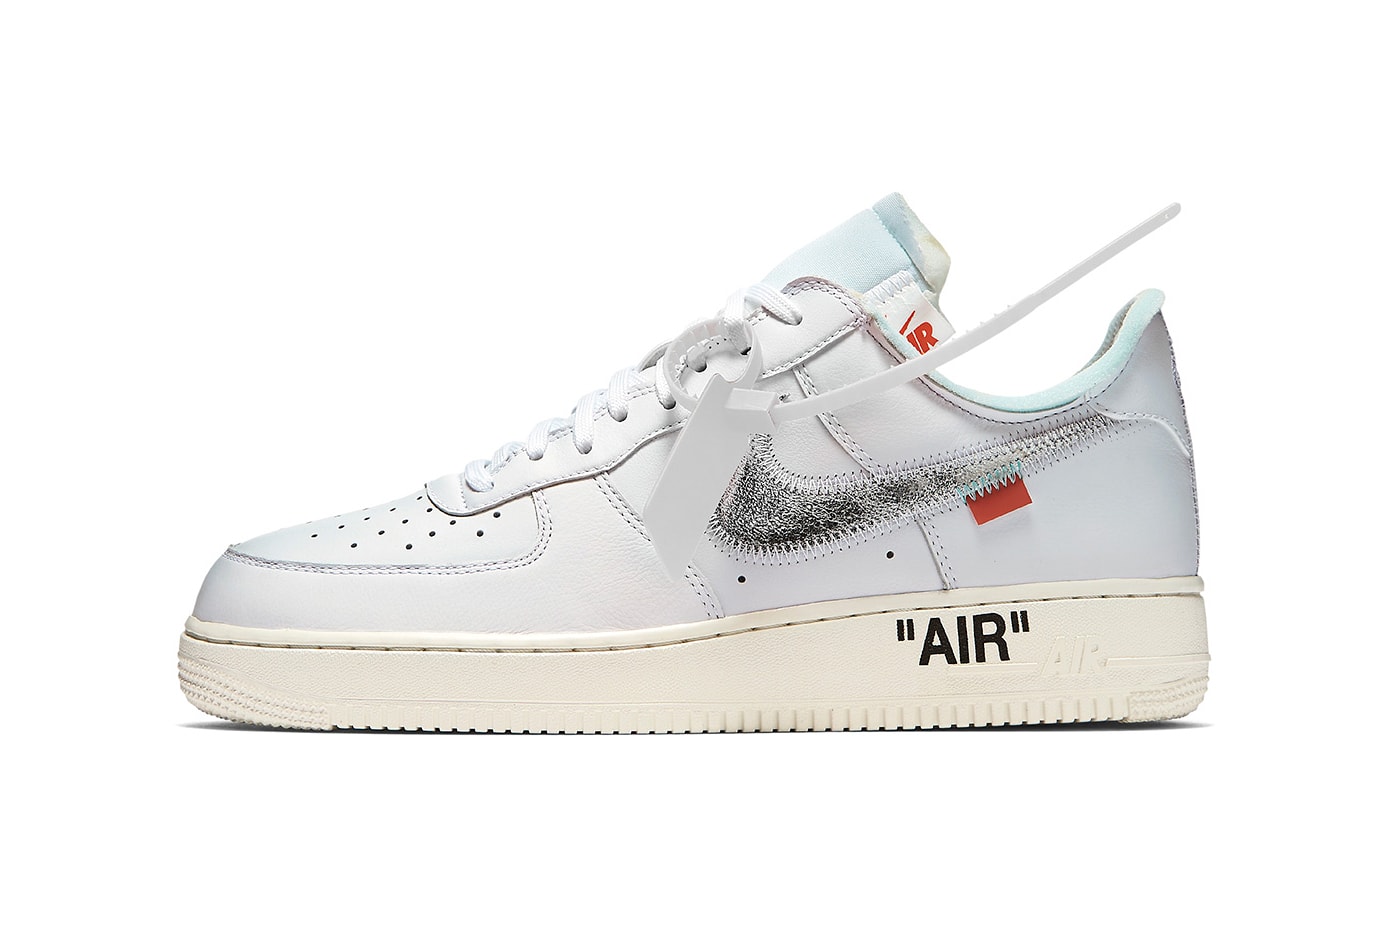 Nike Air Force 1 Low Virgil Abloh Off-White Complexcon